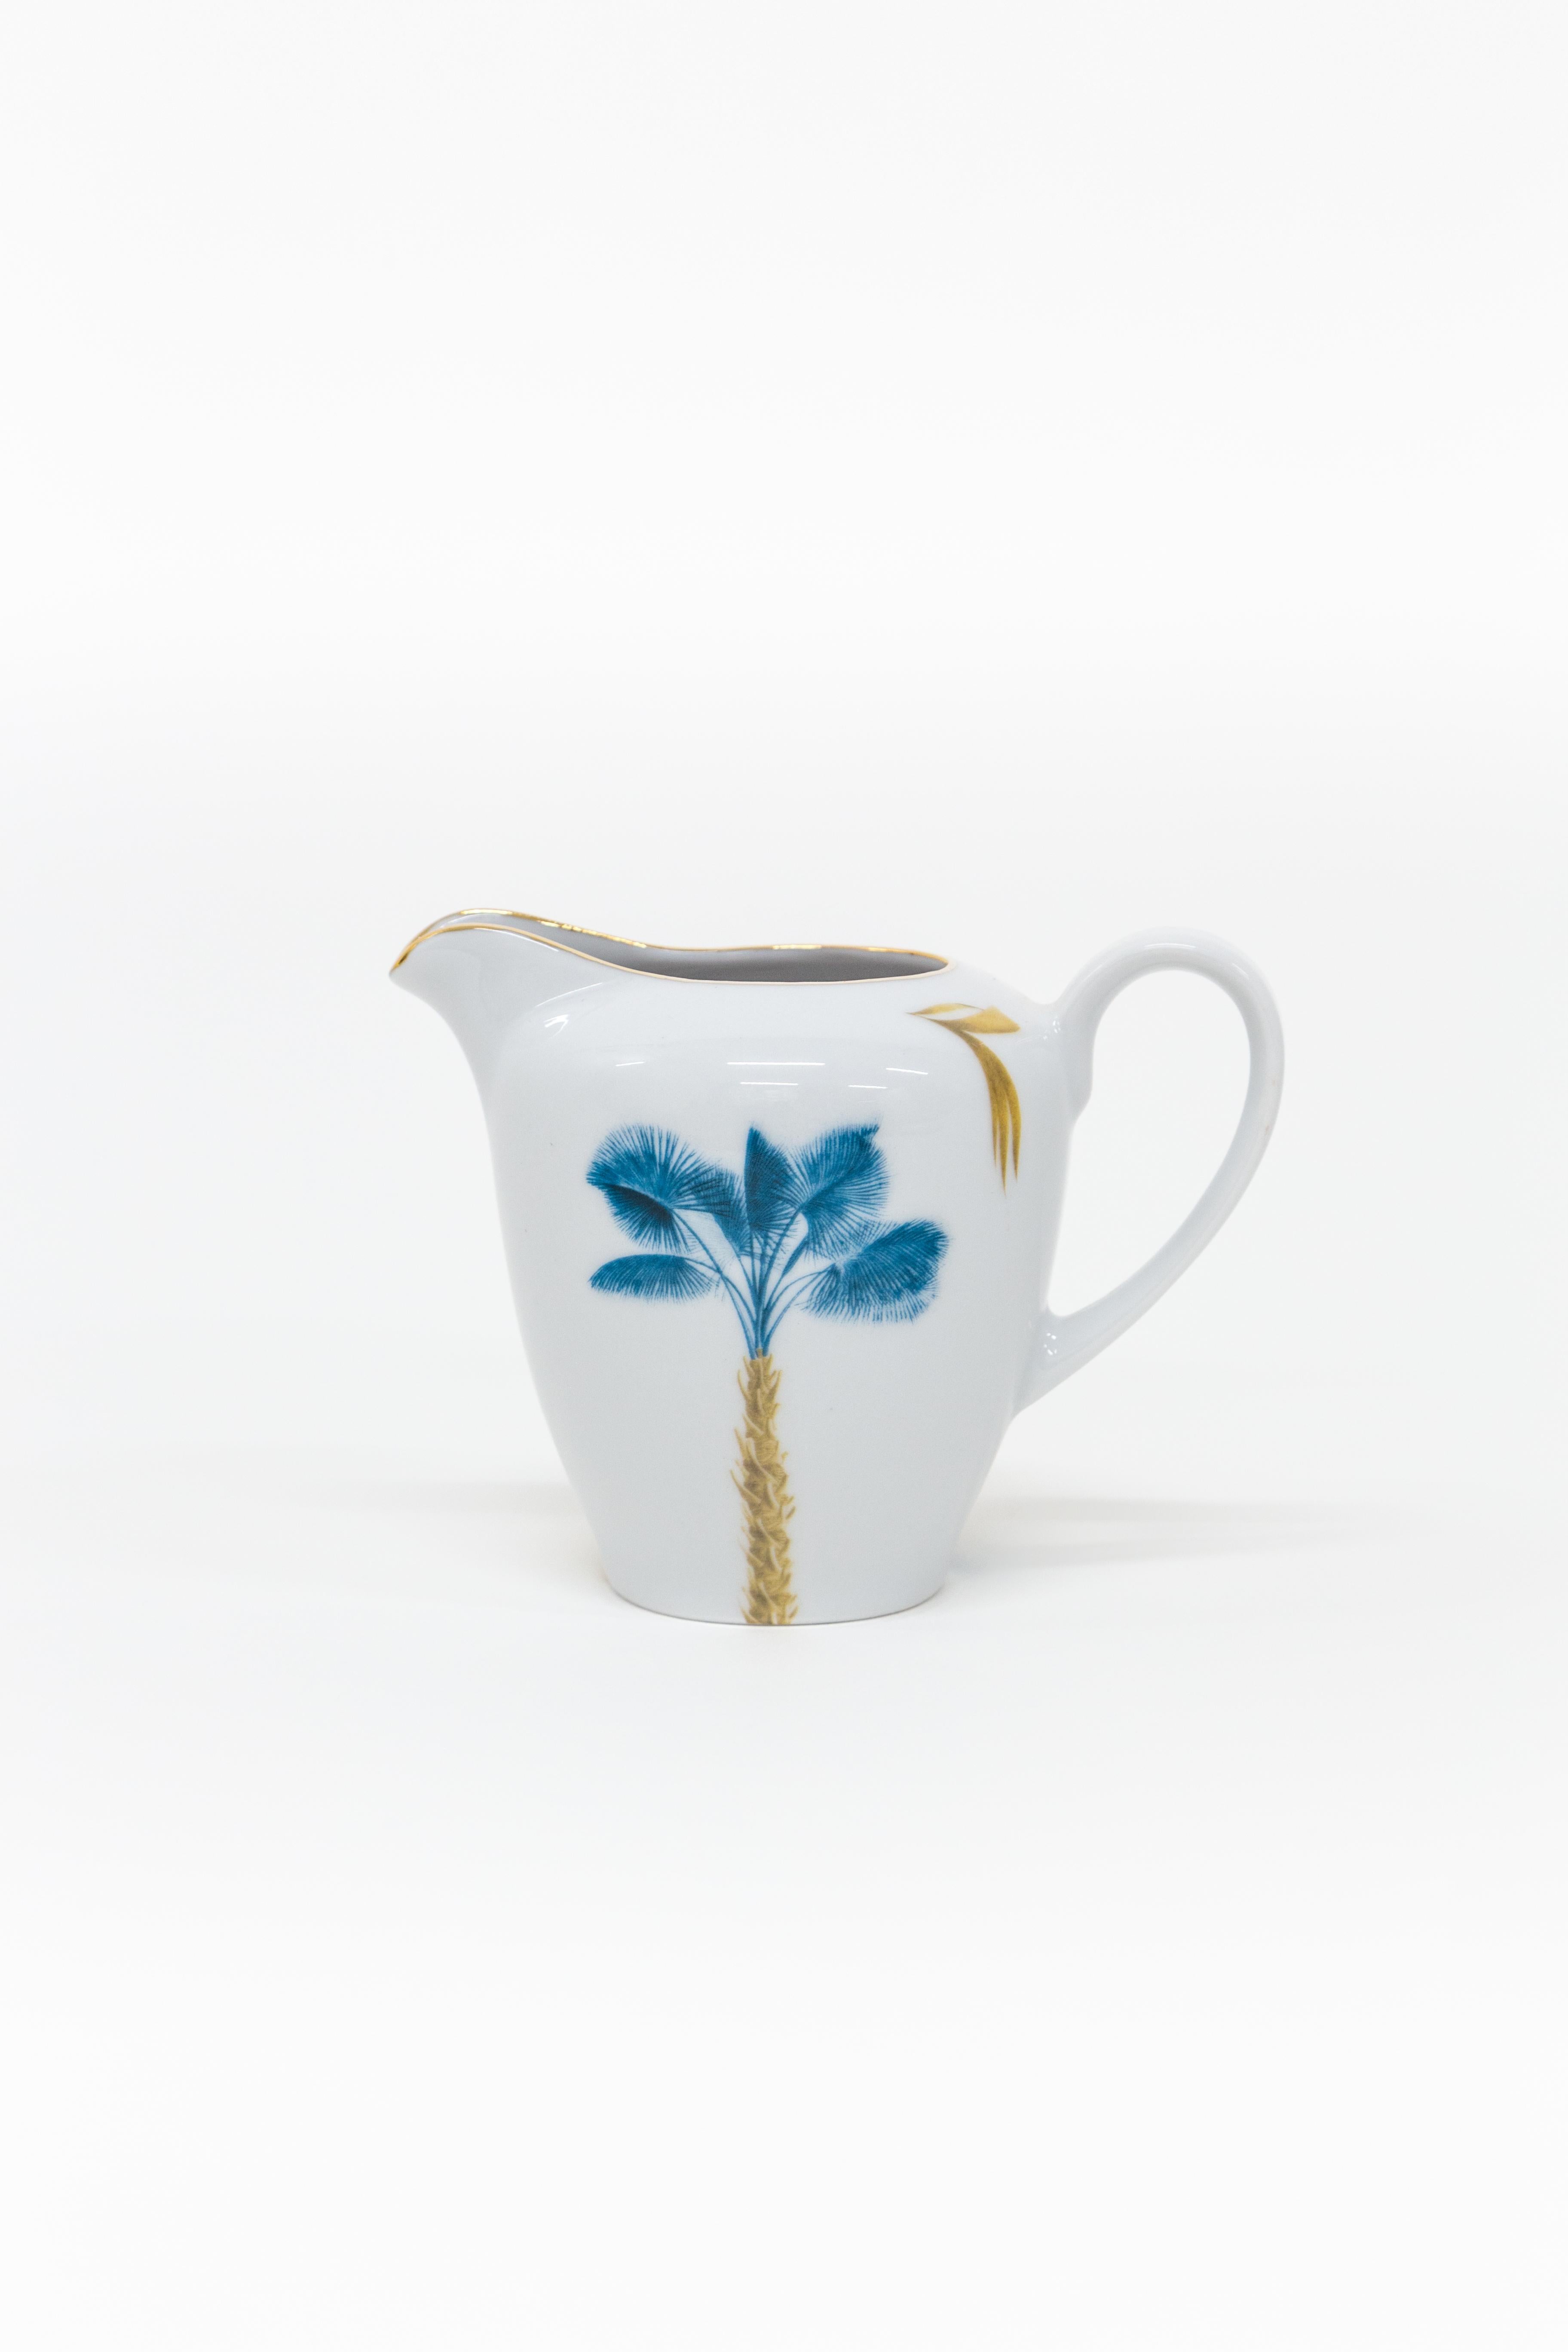 This Tea Time Set is part of the Las Palmas Porcelain collection by Grand Tour by Vito Nesta, inspired by Vito's extensive travels around the world. In this set, beautiful palm trees are surrounded by golden and blue leafs. This design is a dainty